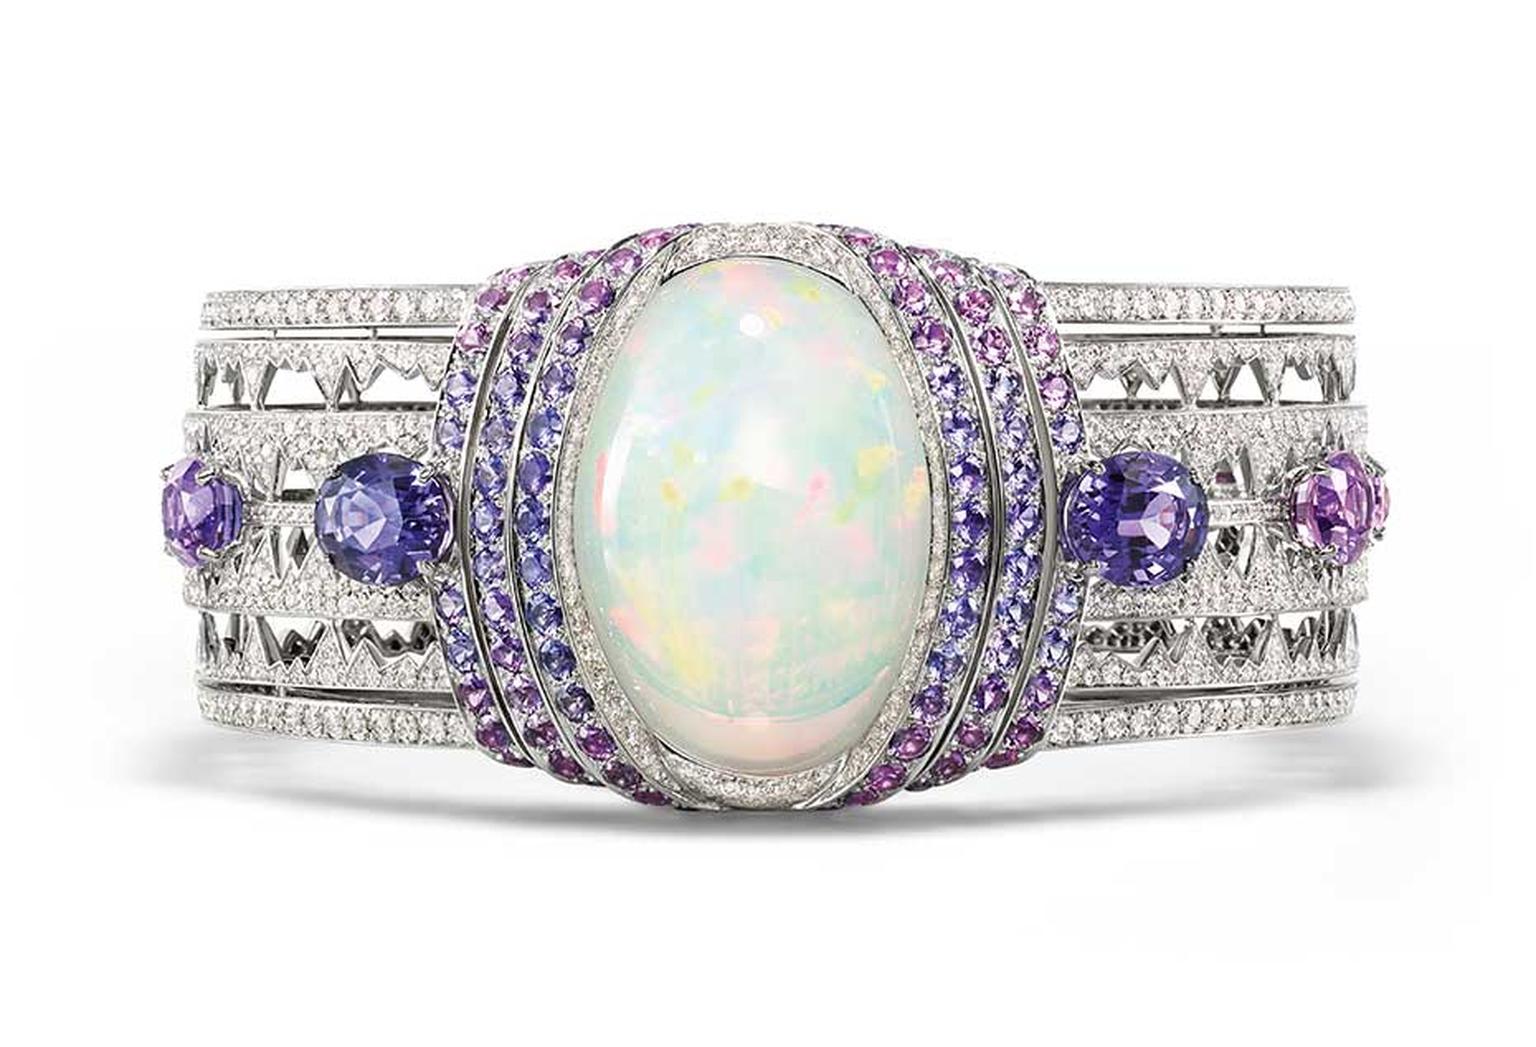 Chaumet bracelet in white gold set with a 39.05ct cabochon-cut white opal from Ethiopia, brilliant-cut diamonds, oval-cut violet sapphires from Ceylon and Madagascar and round violet sapphires, from the Lumieres d’Eau high jewellery collection.